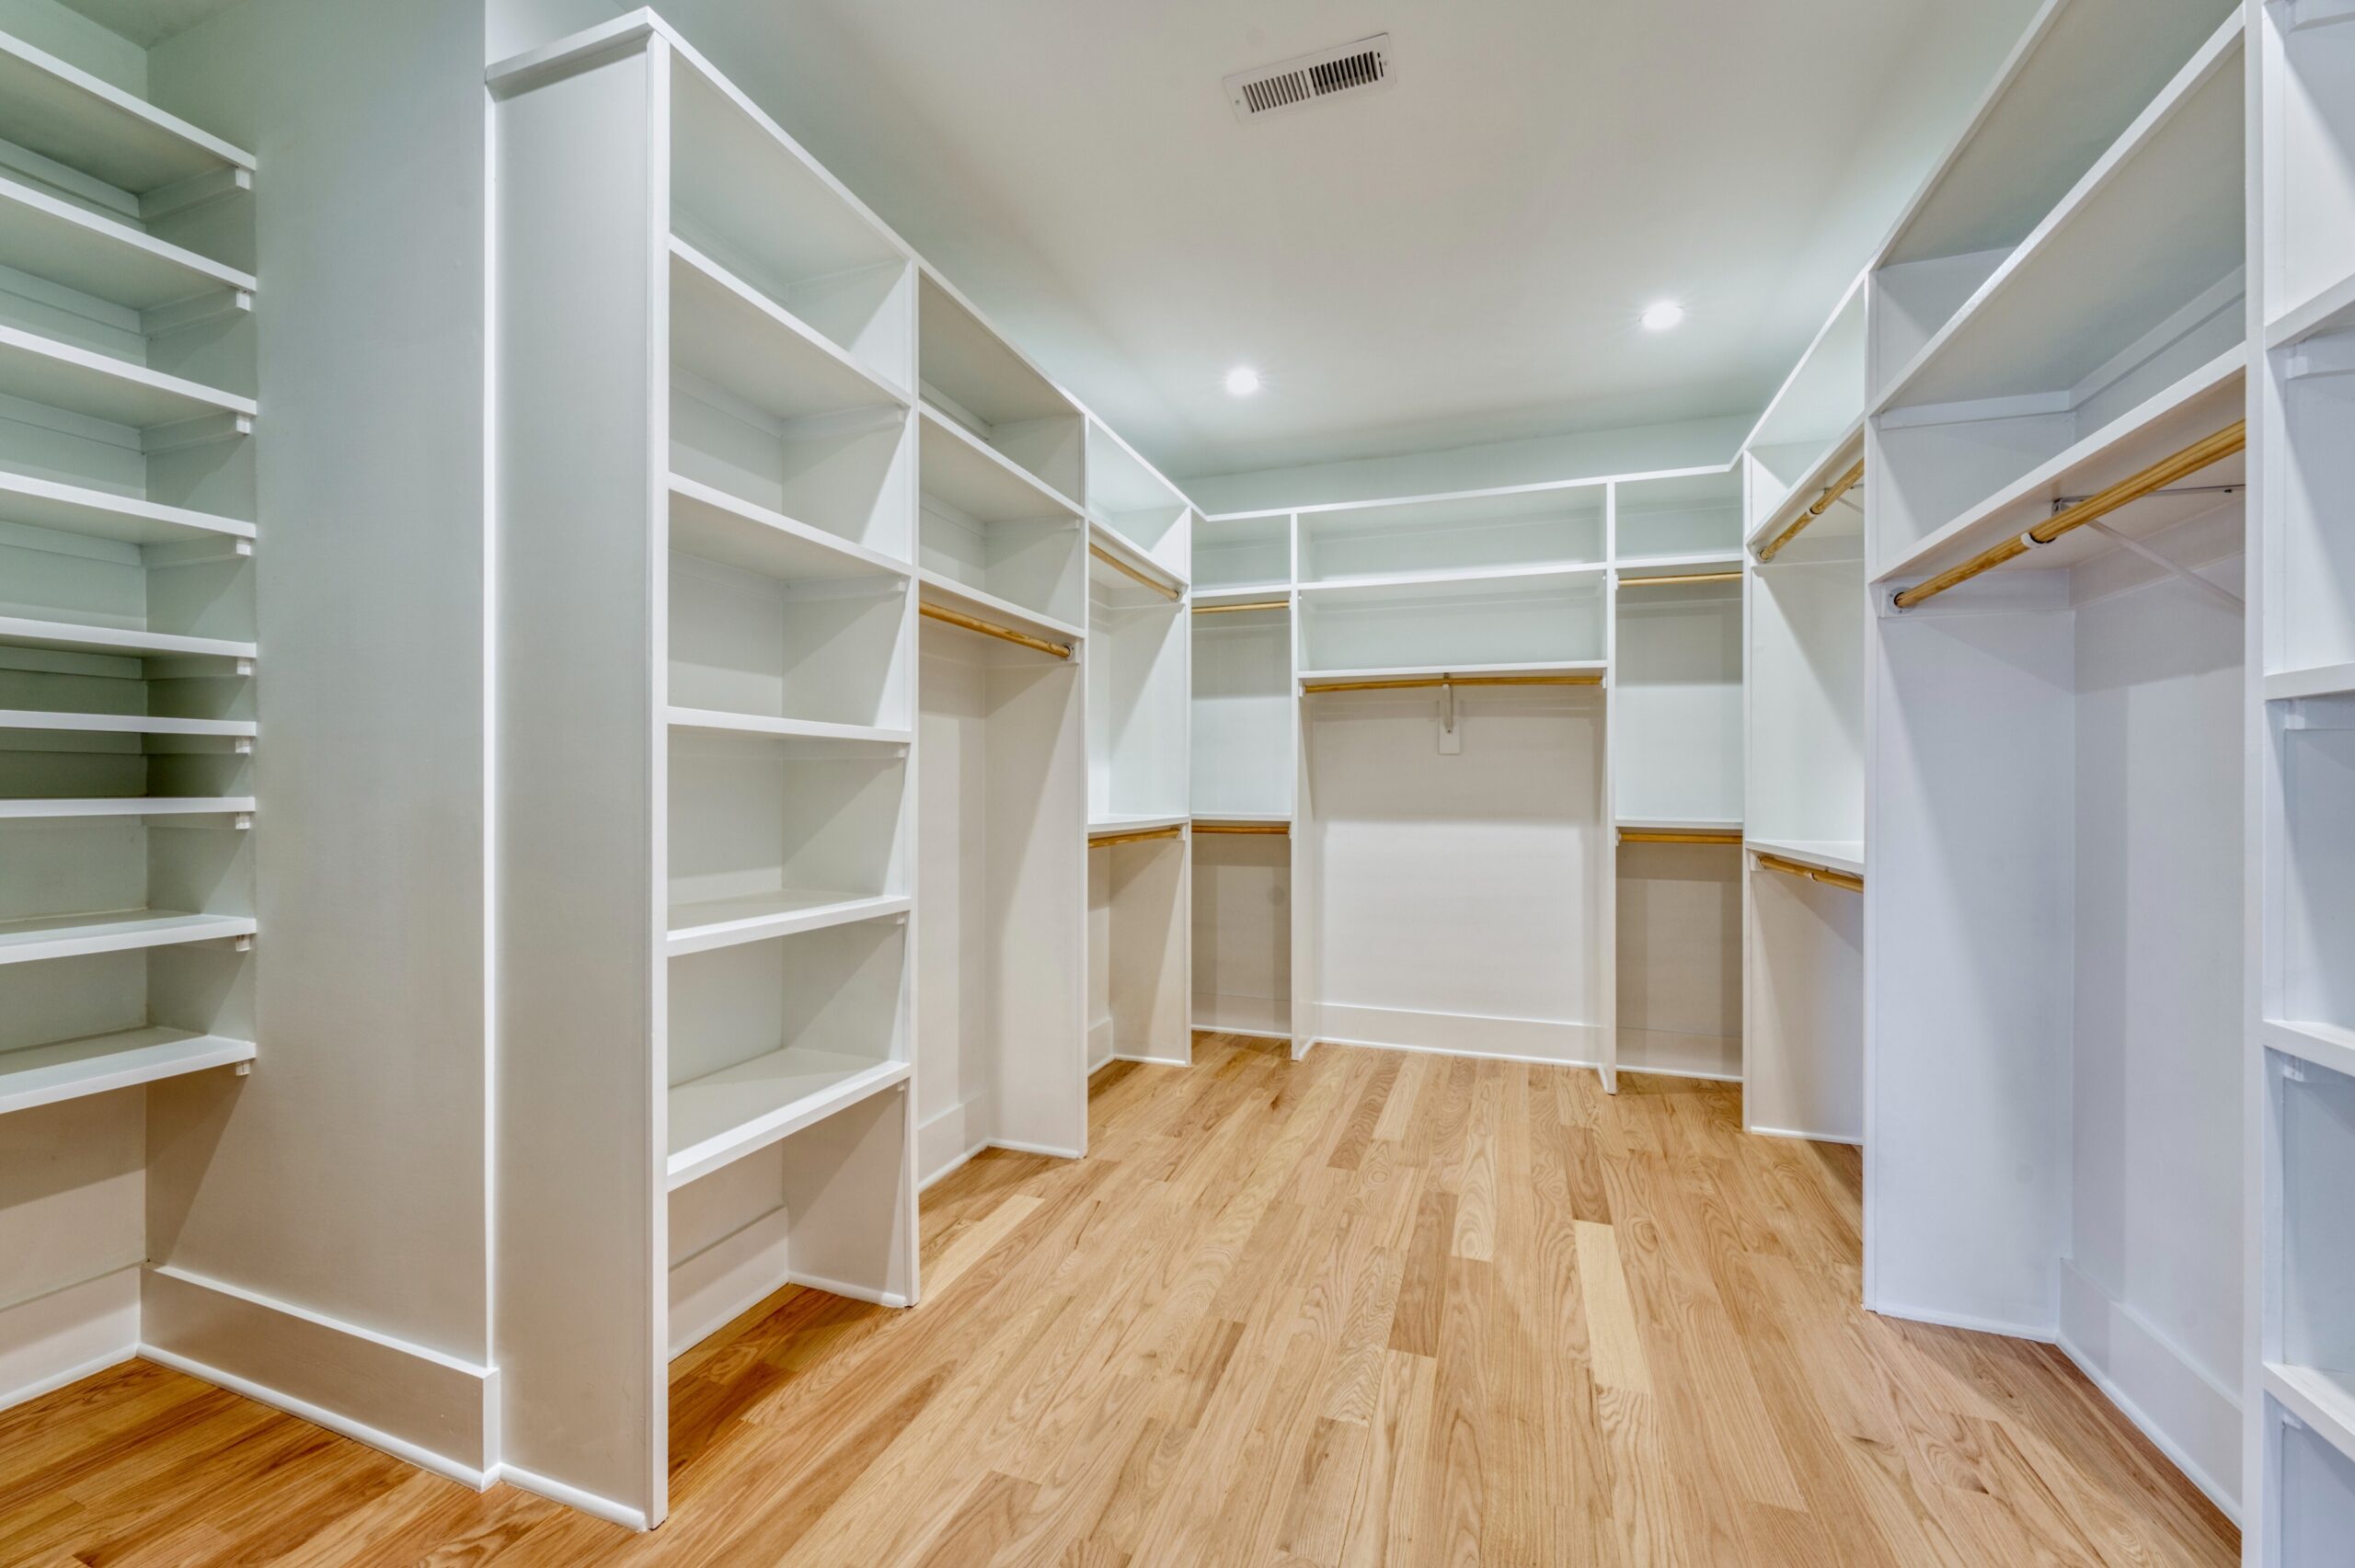 Professional interior photo of Custom New Home 1416 S Greenbrier St - showing the HUGE custom closet for the primary suite with multiple levels of shelving